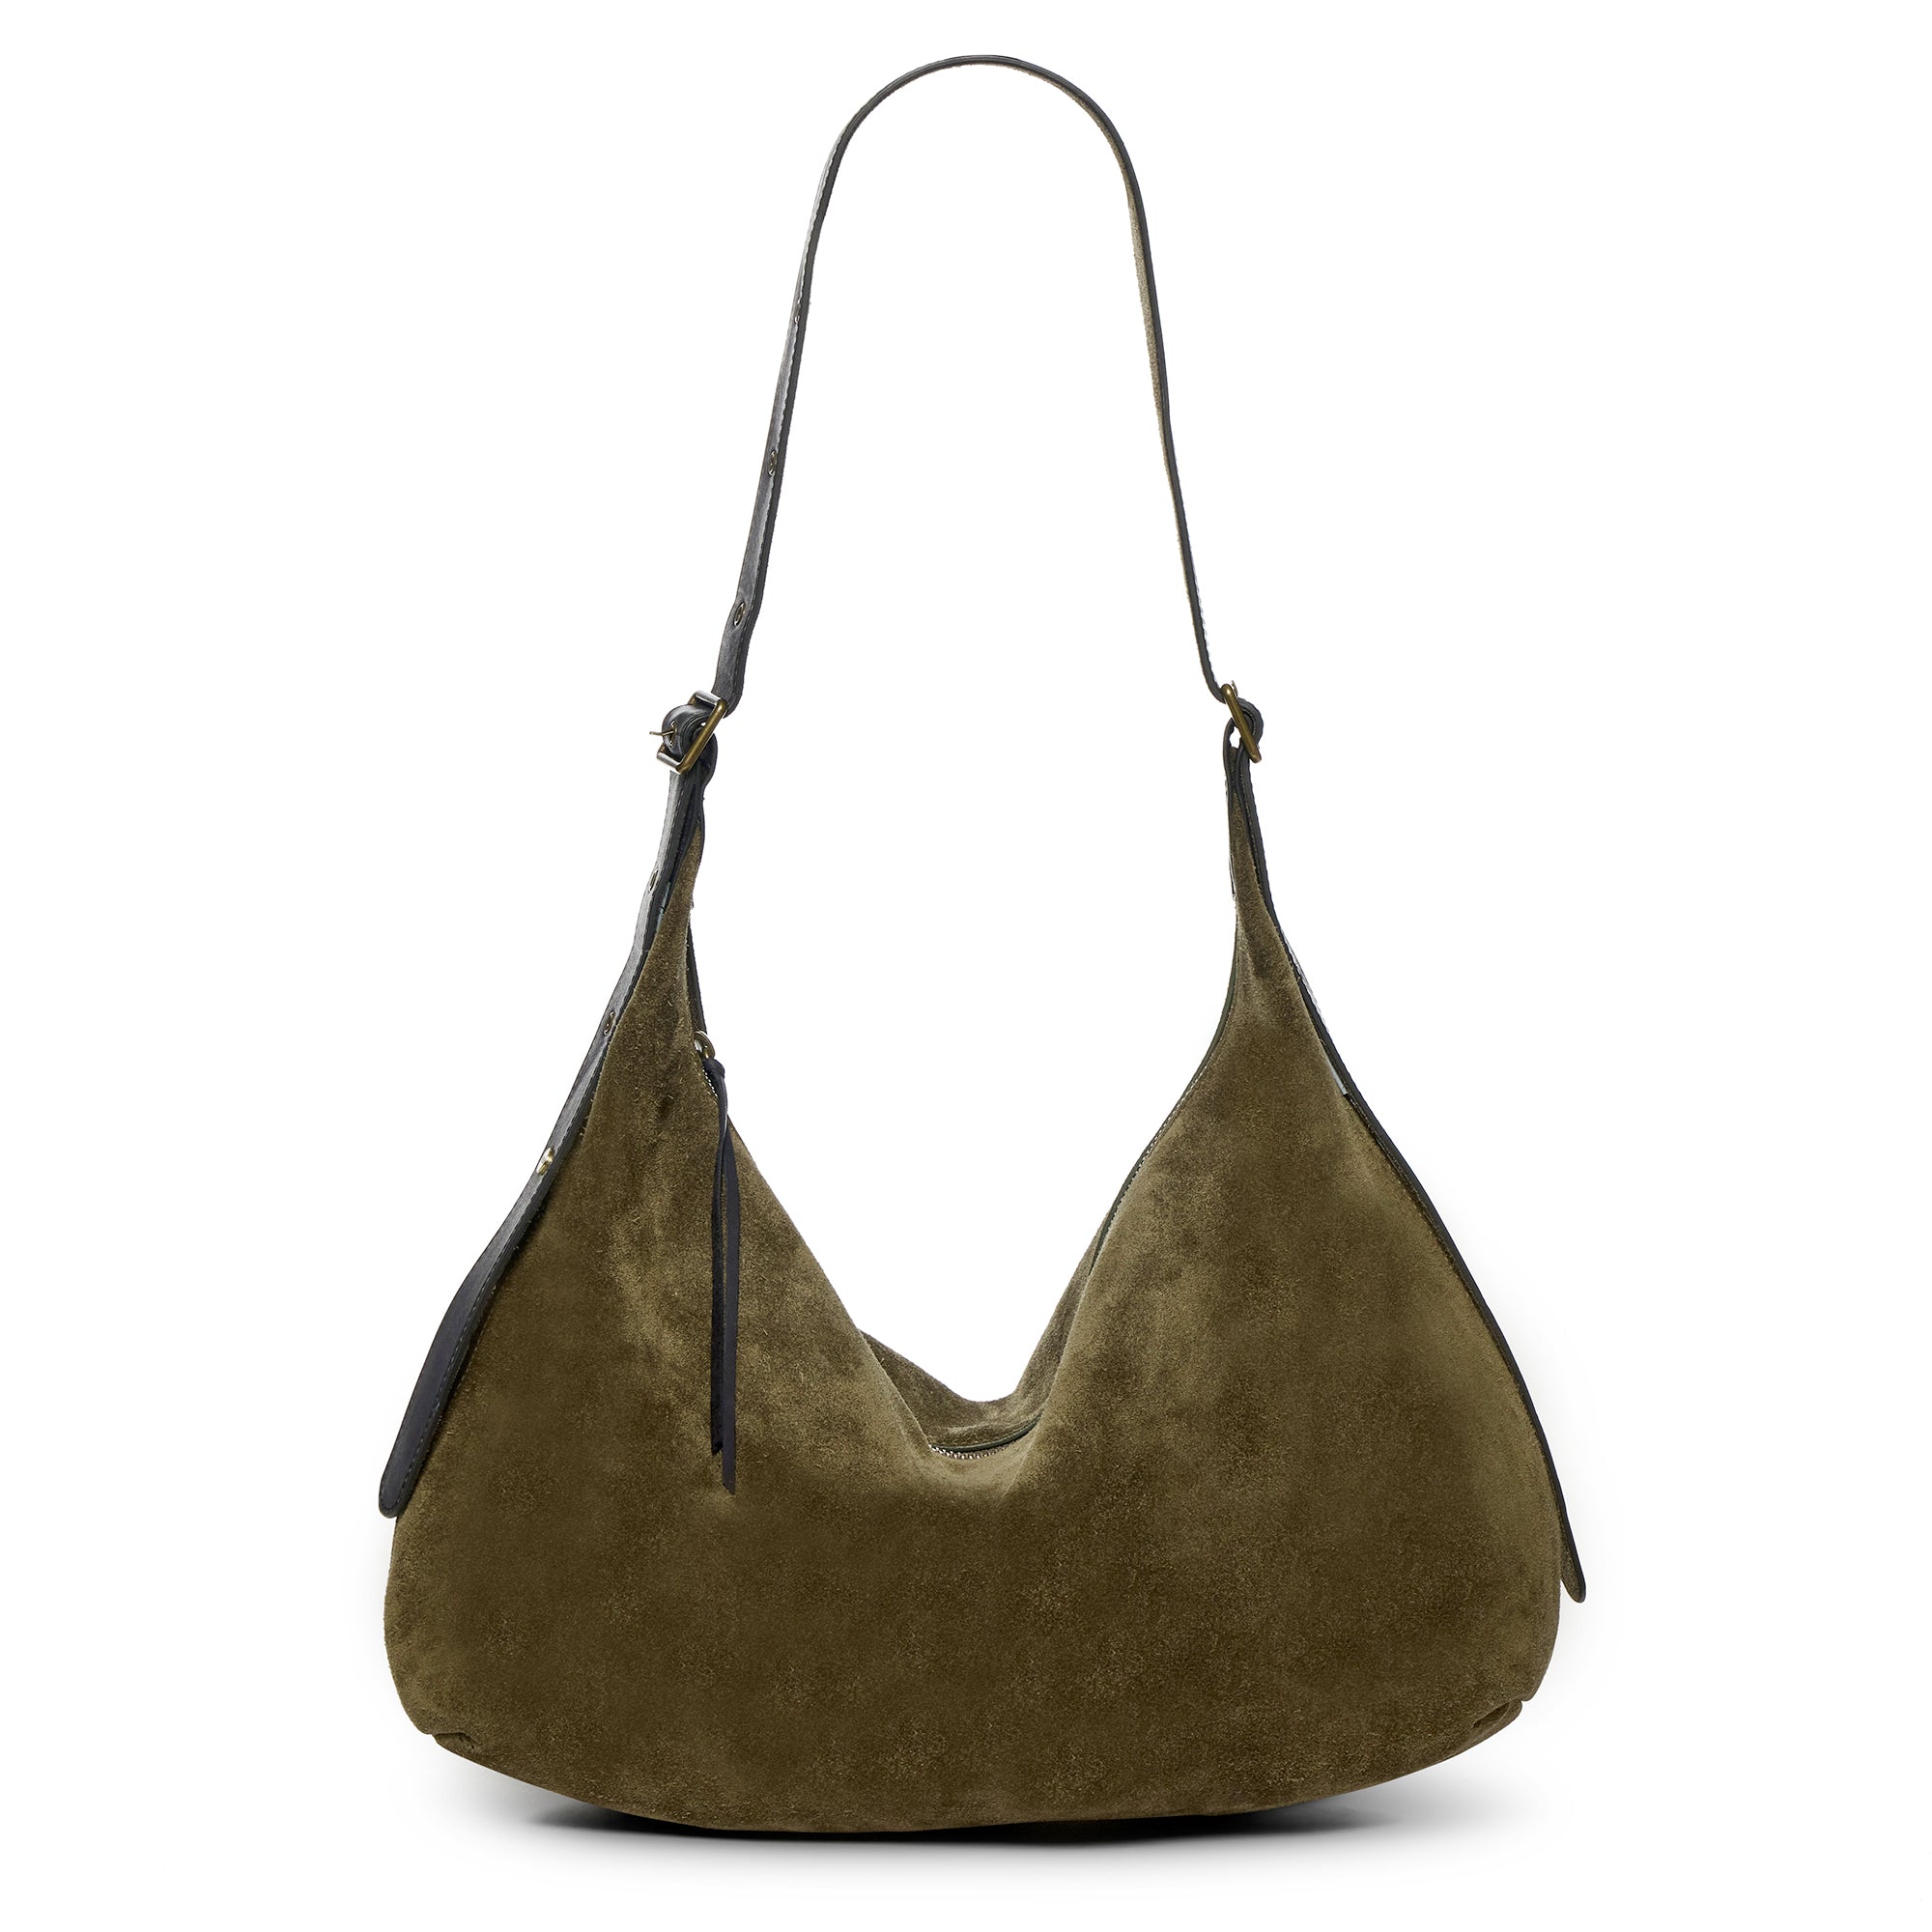 COMPLIMENTARY: Small bucket-bag in tan suede